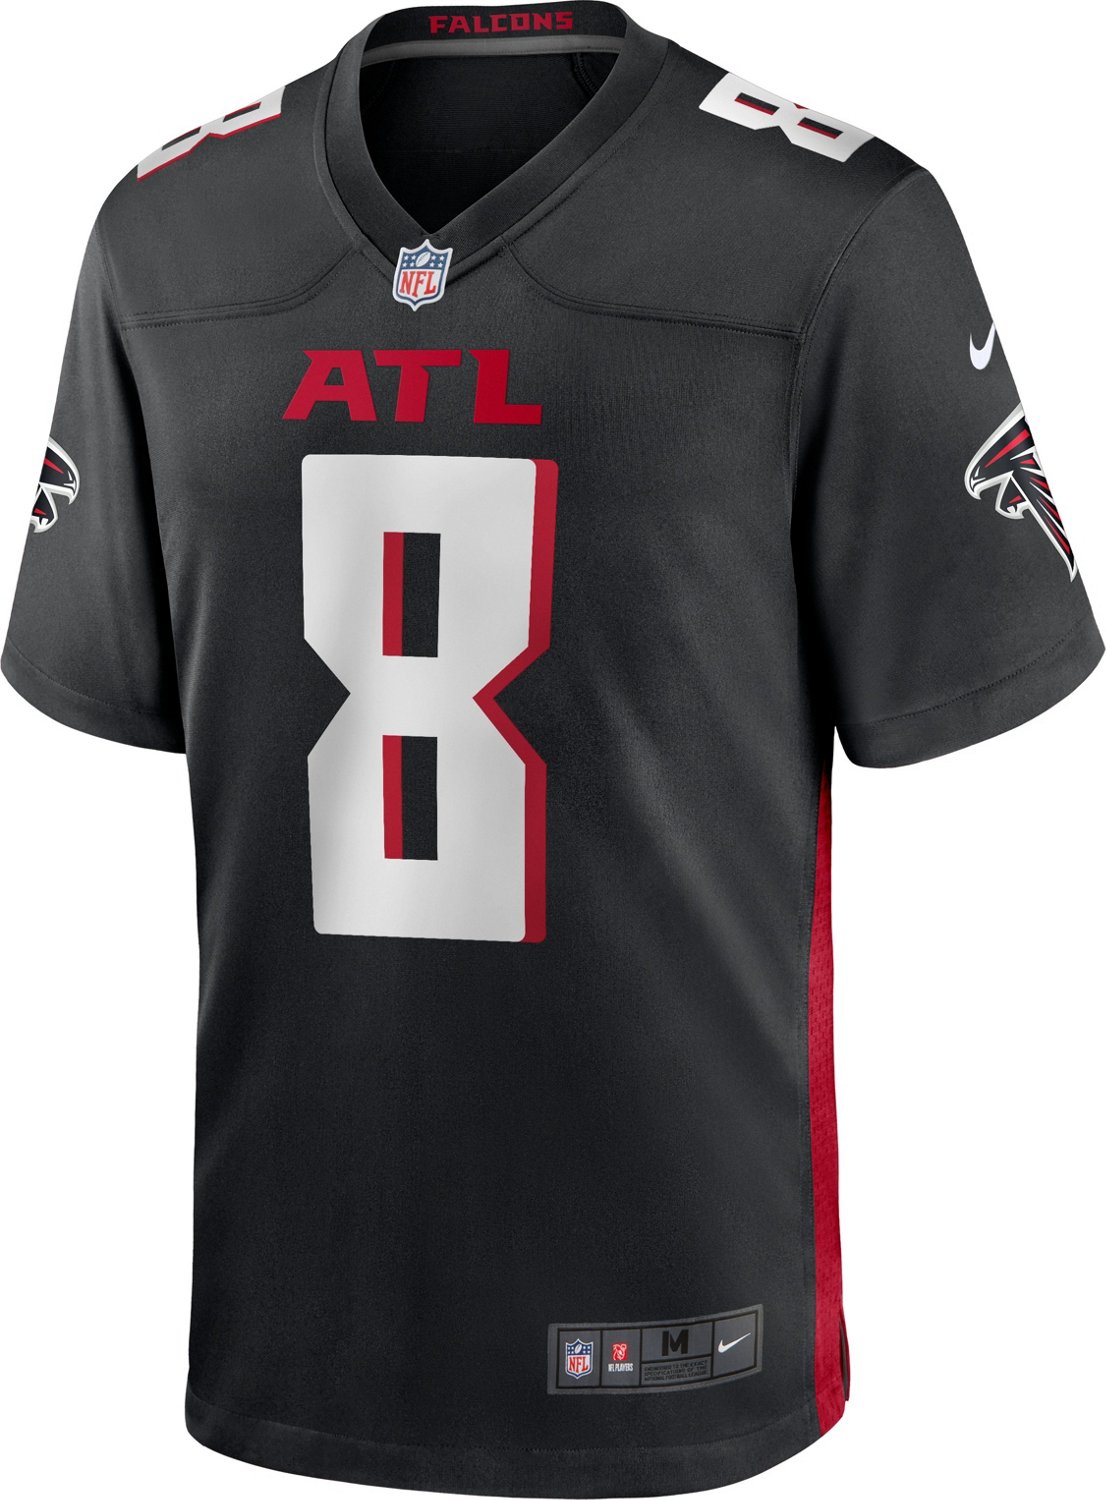 Nike Men's Atlanta Falcons Pitts Home Game Player Jersey